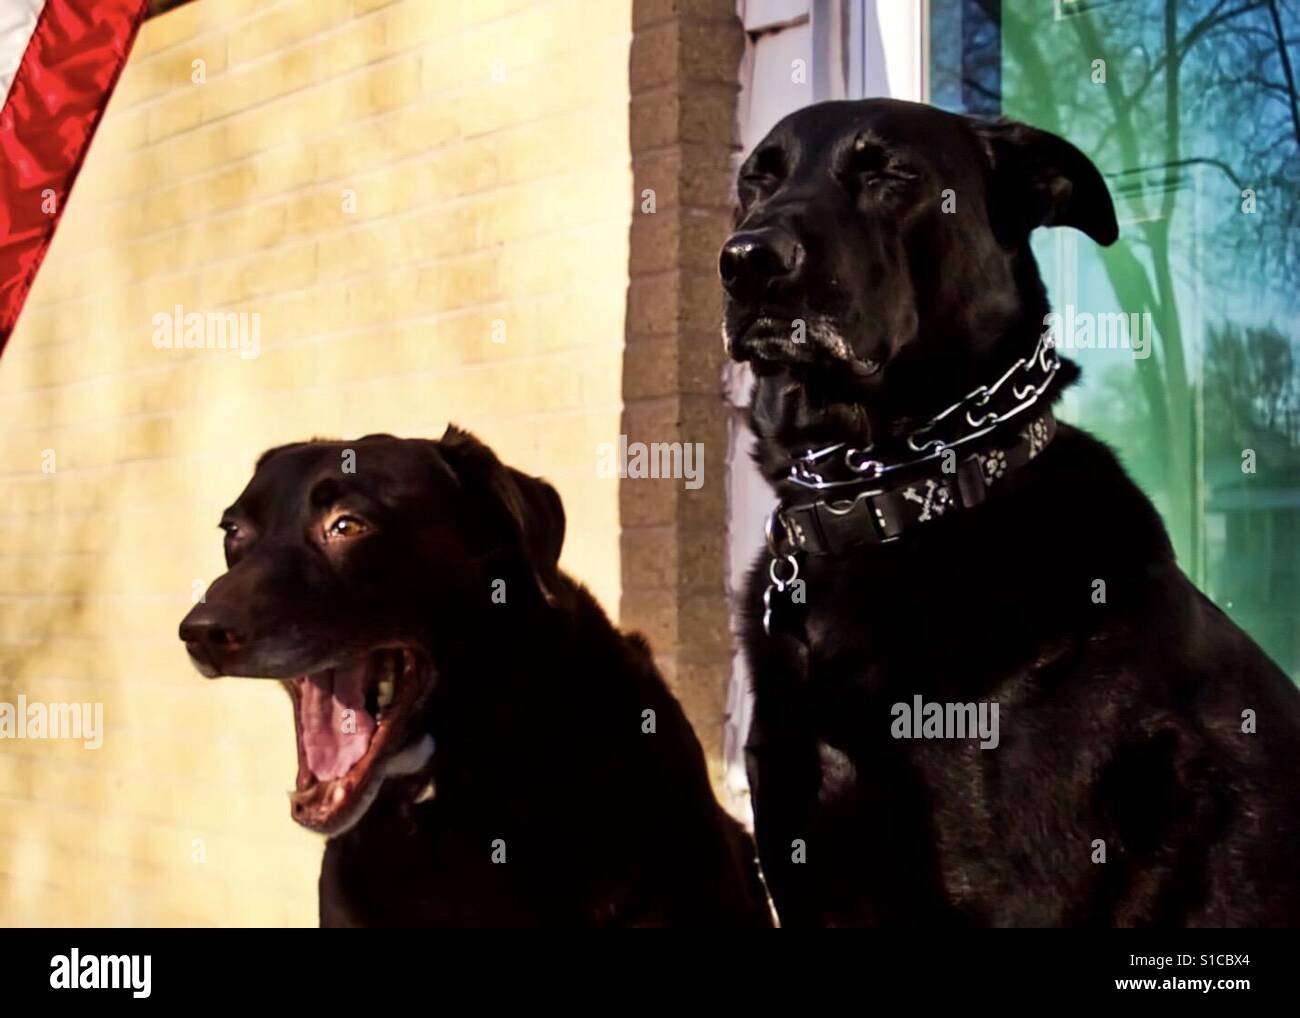 The biggest dorks in the world - chocolate lab mid yawn and black shepherd blinking. Stock Photo